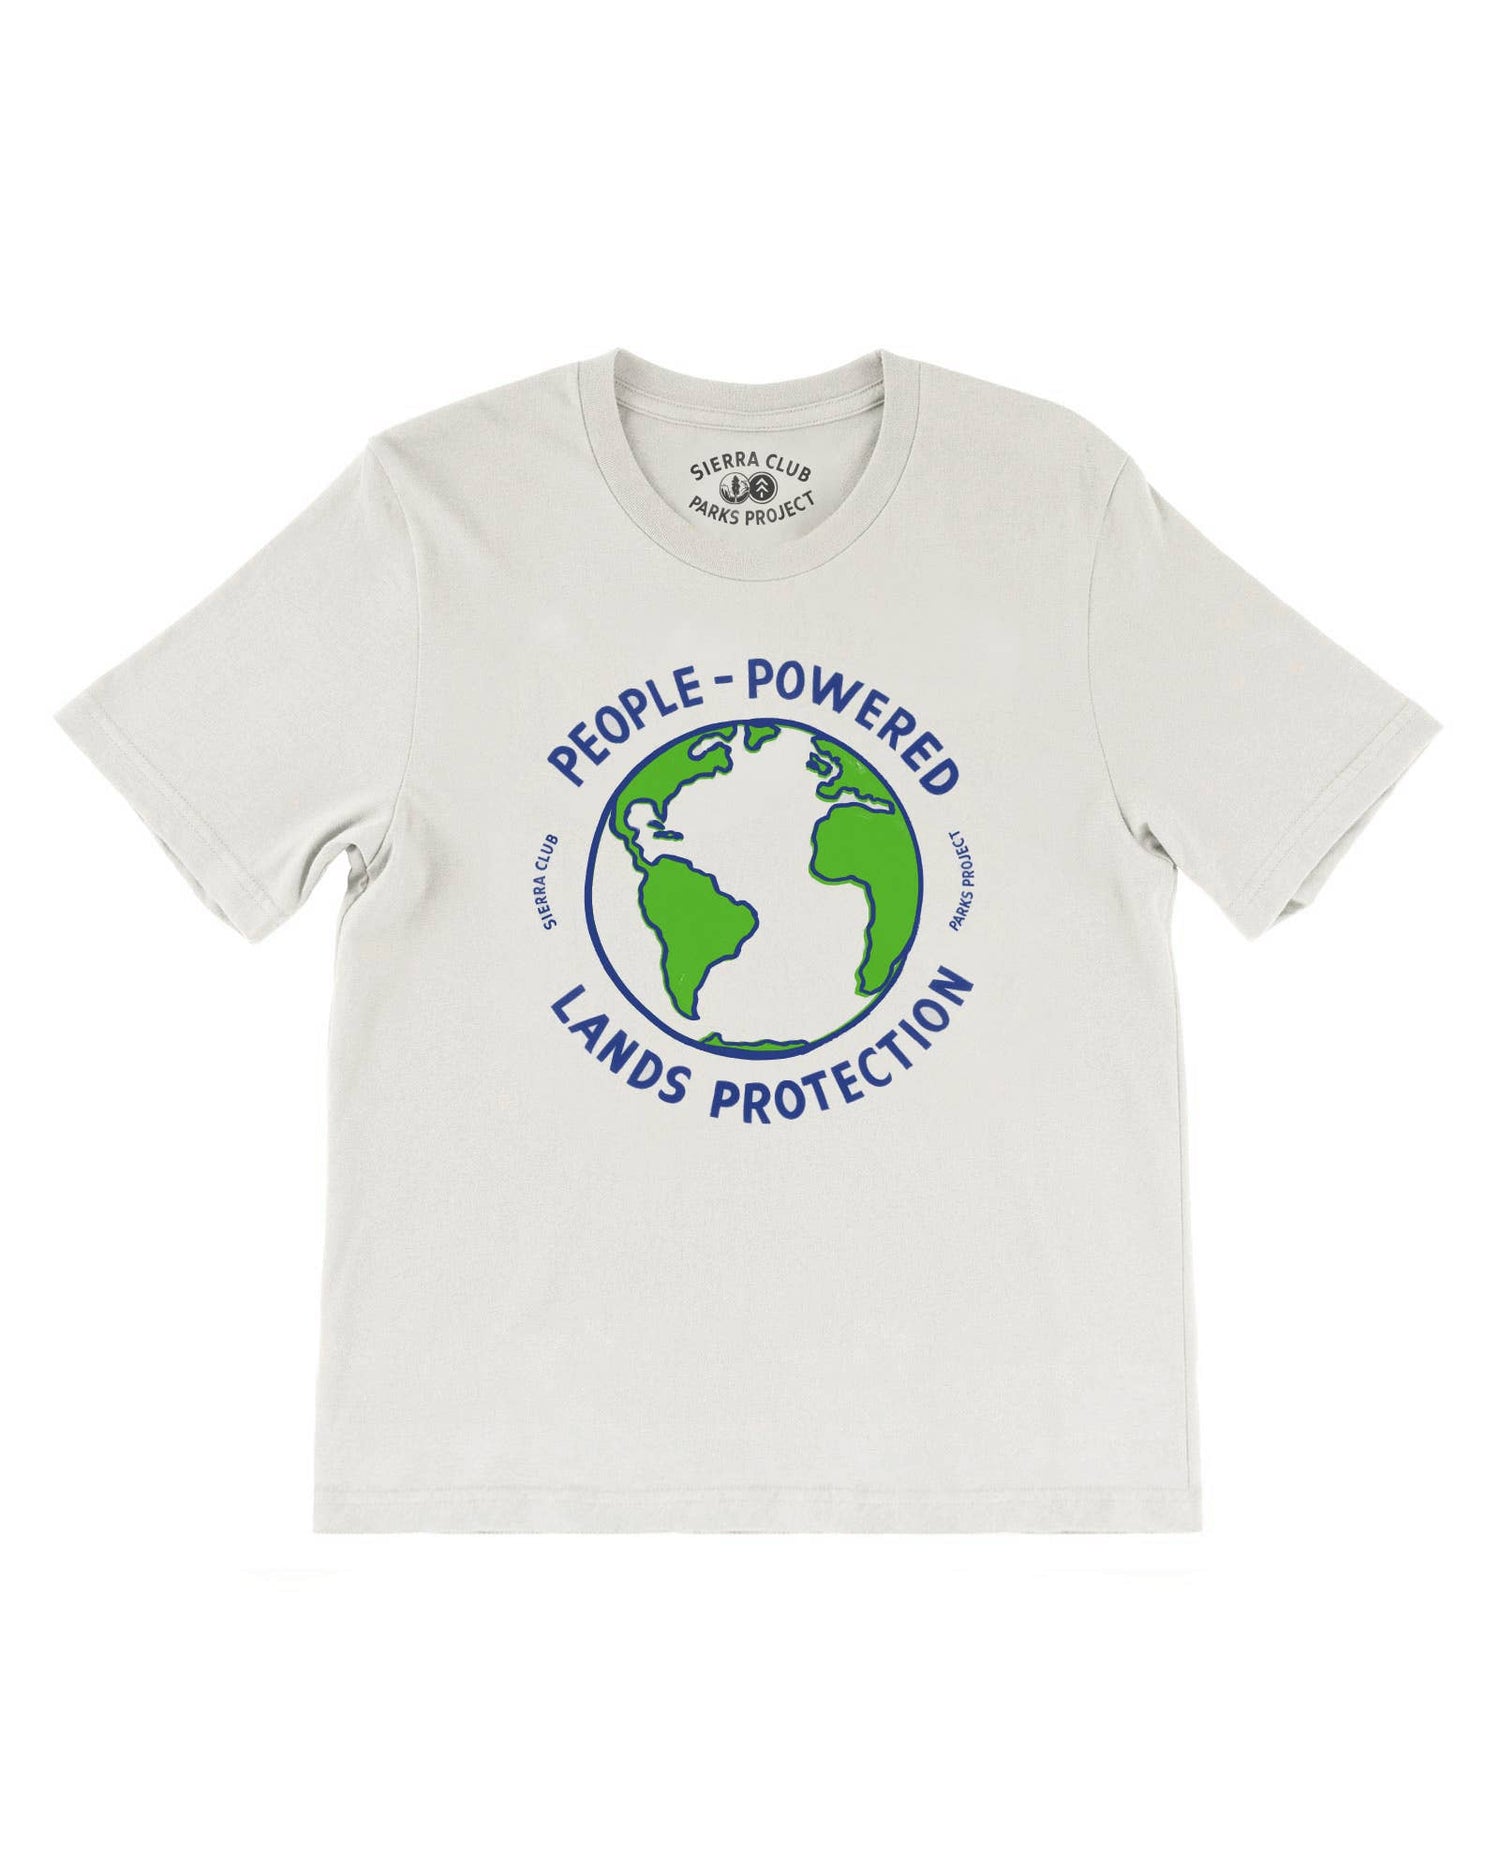 White shirt with earth that reads People Powered lands protection by Parks Project + Sierra Club